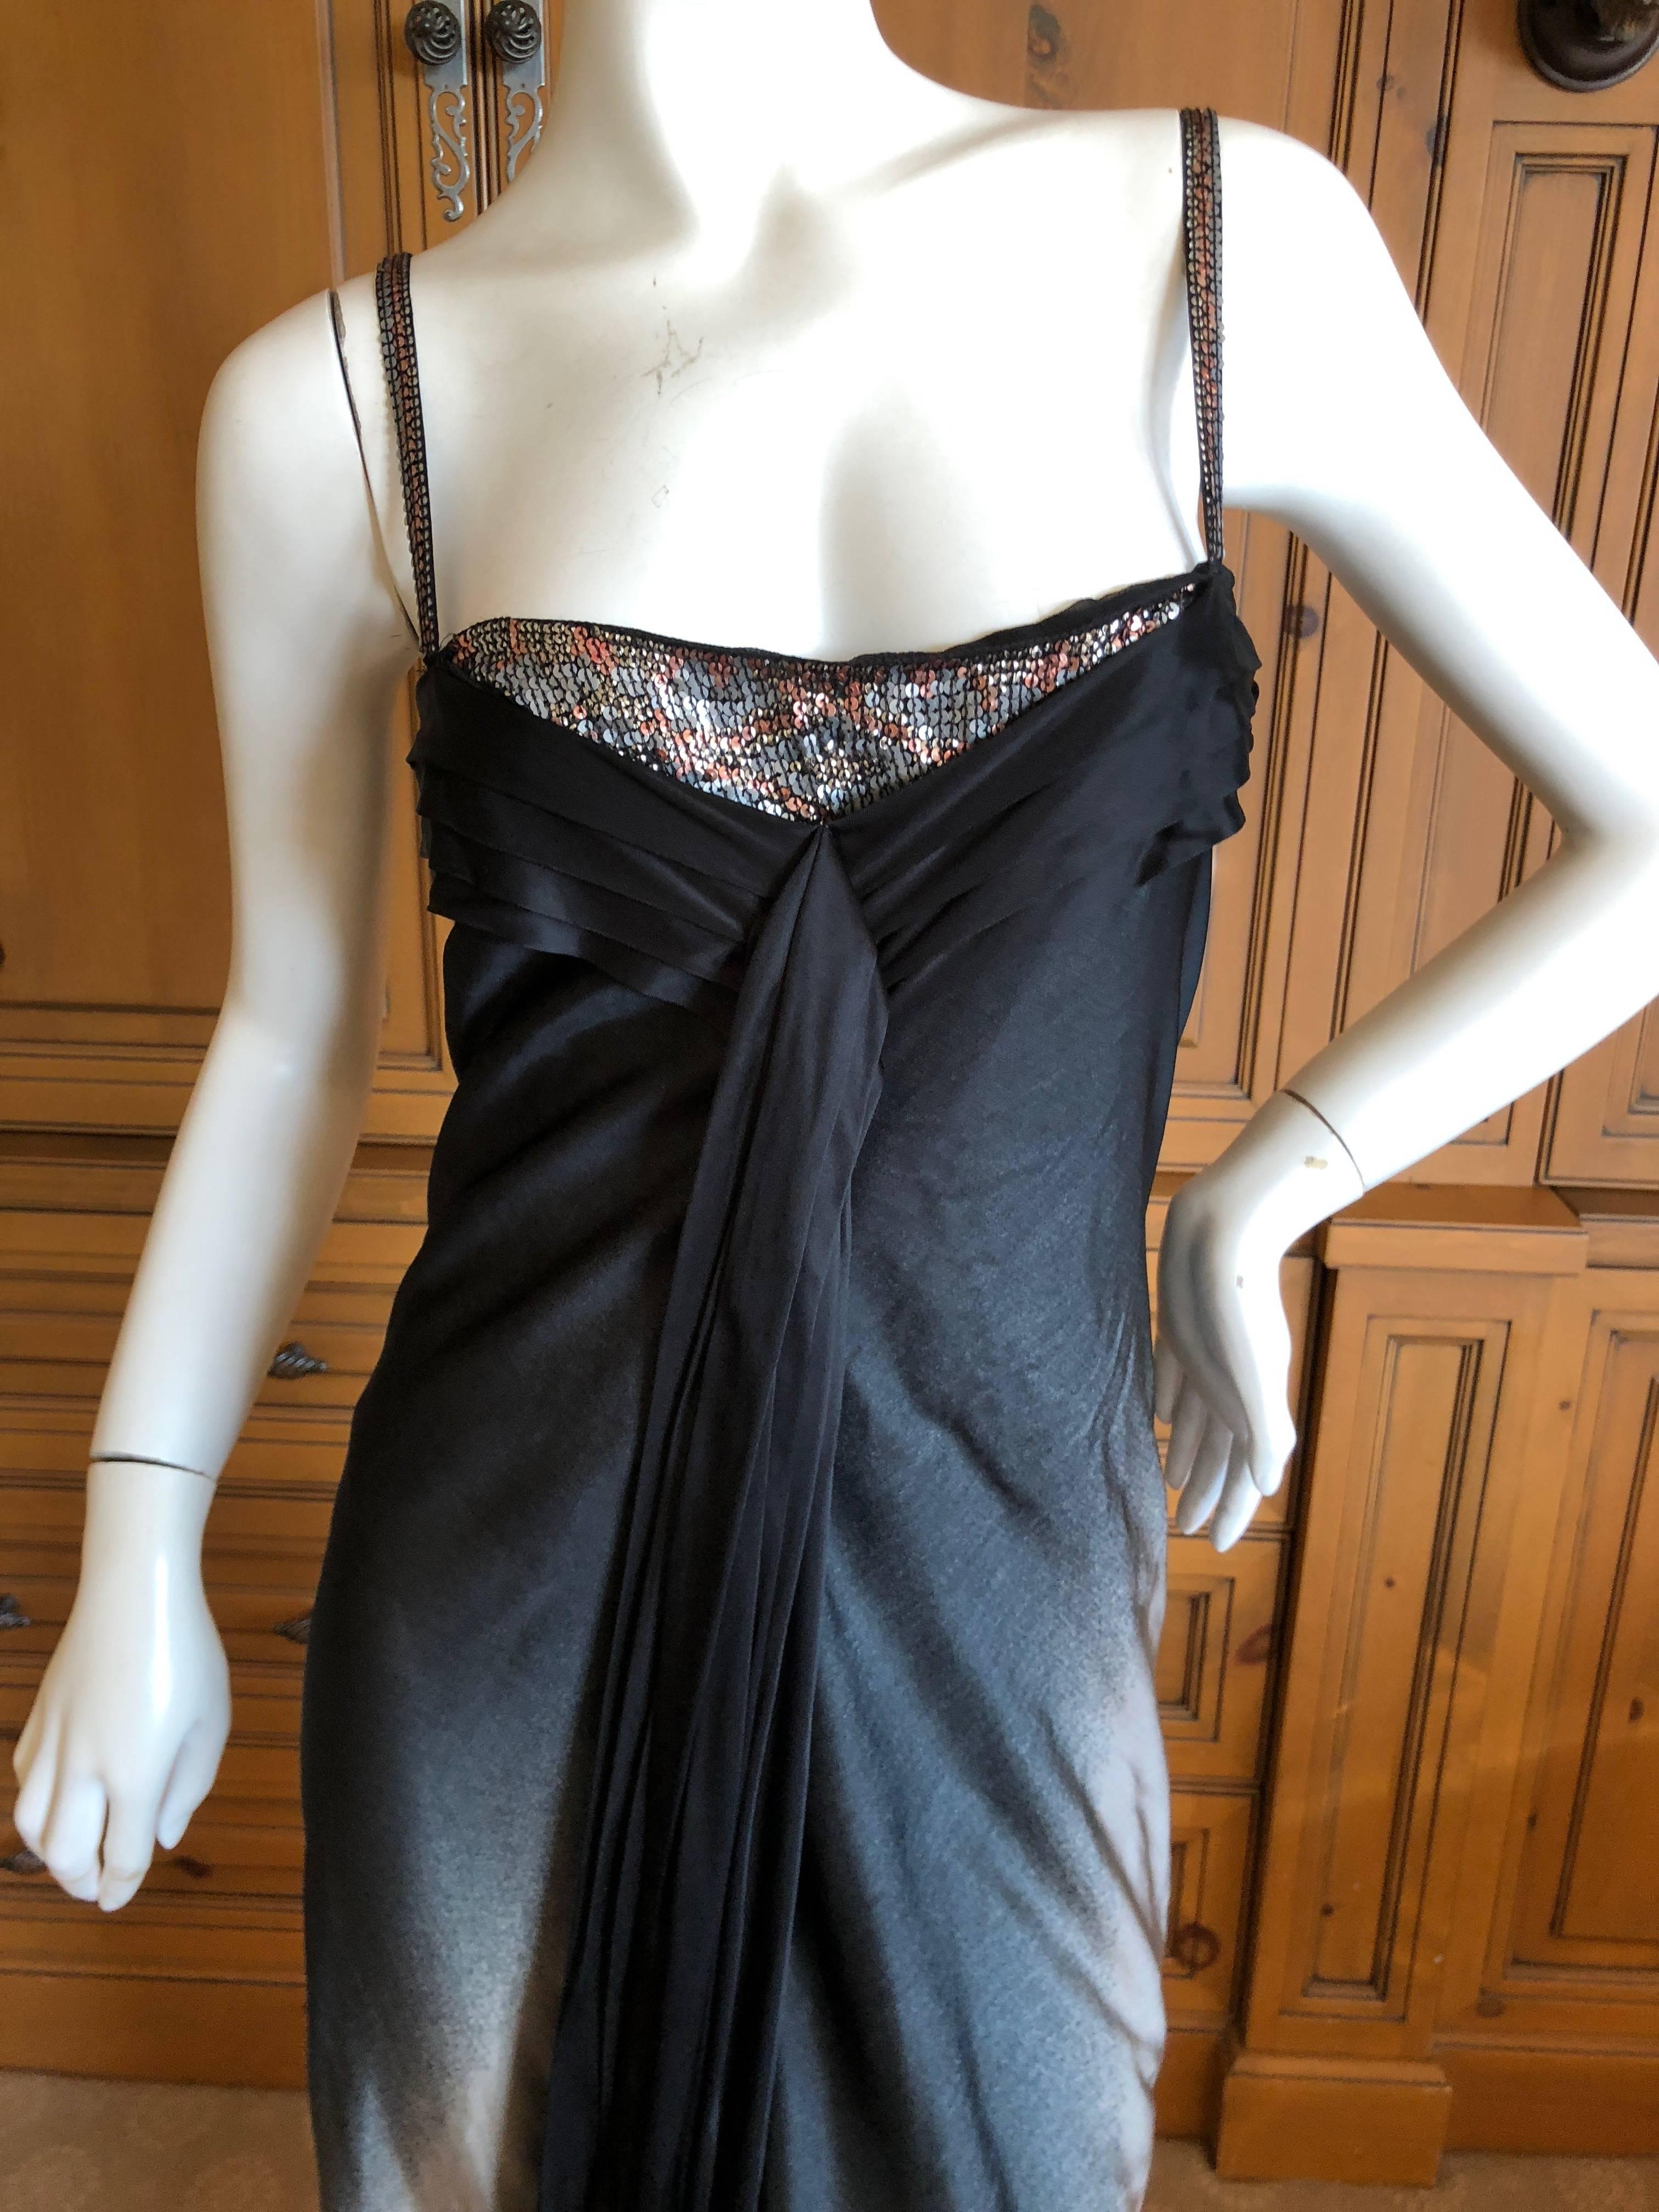 Christian Lacroix Silver and Black Vintage Silk Evening Dress with Sequin Detail For Sale 3